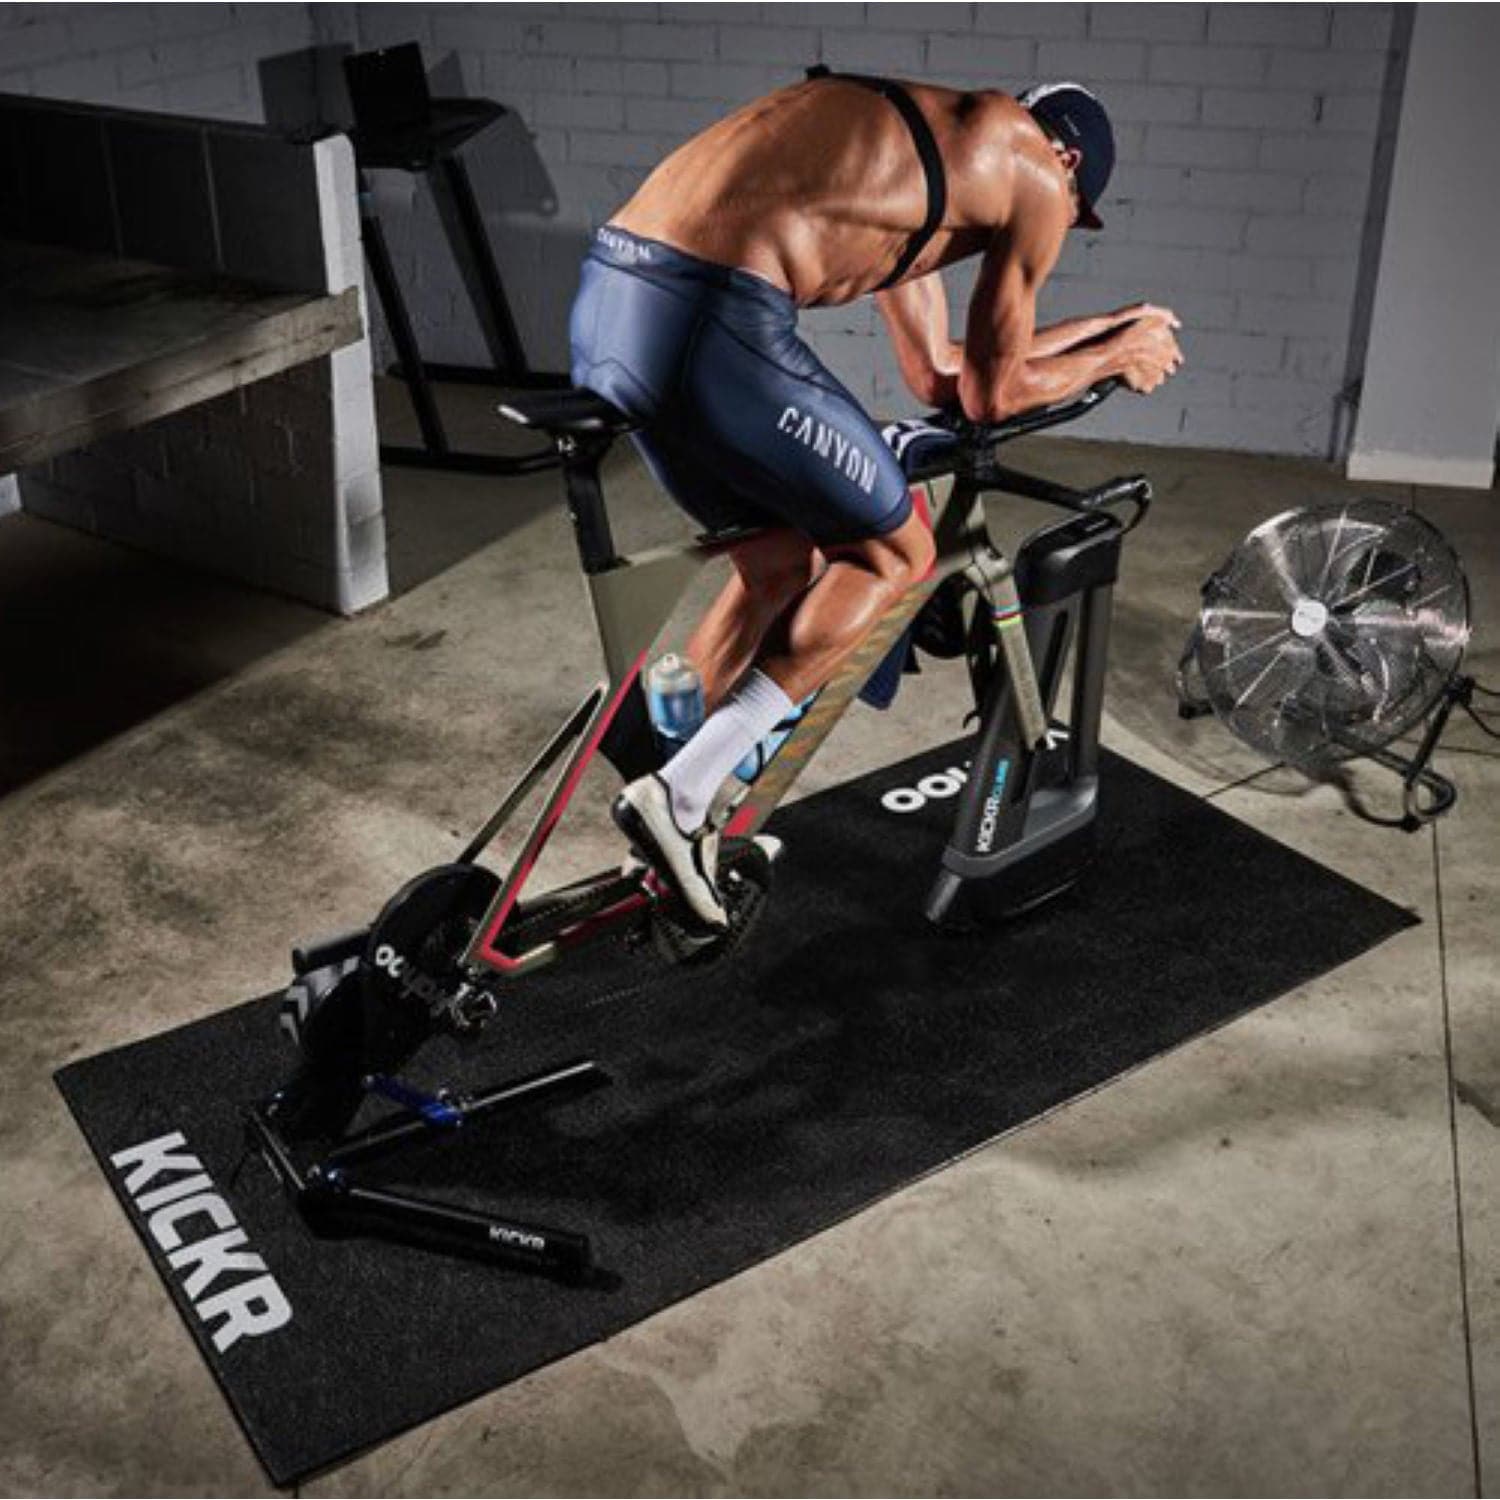 wahoo kickr trainer mat with bike on